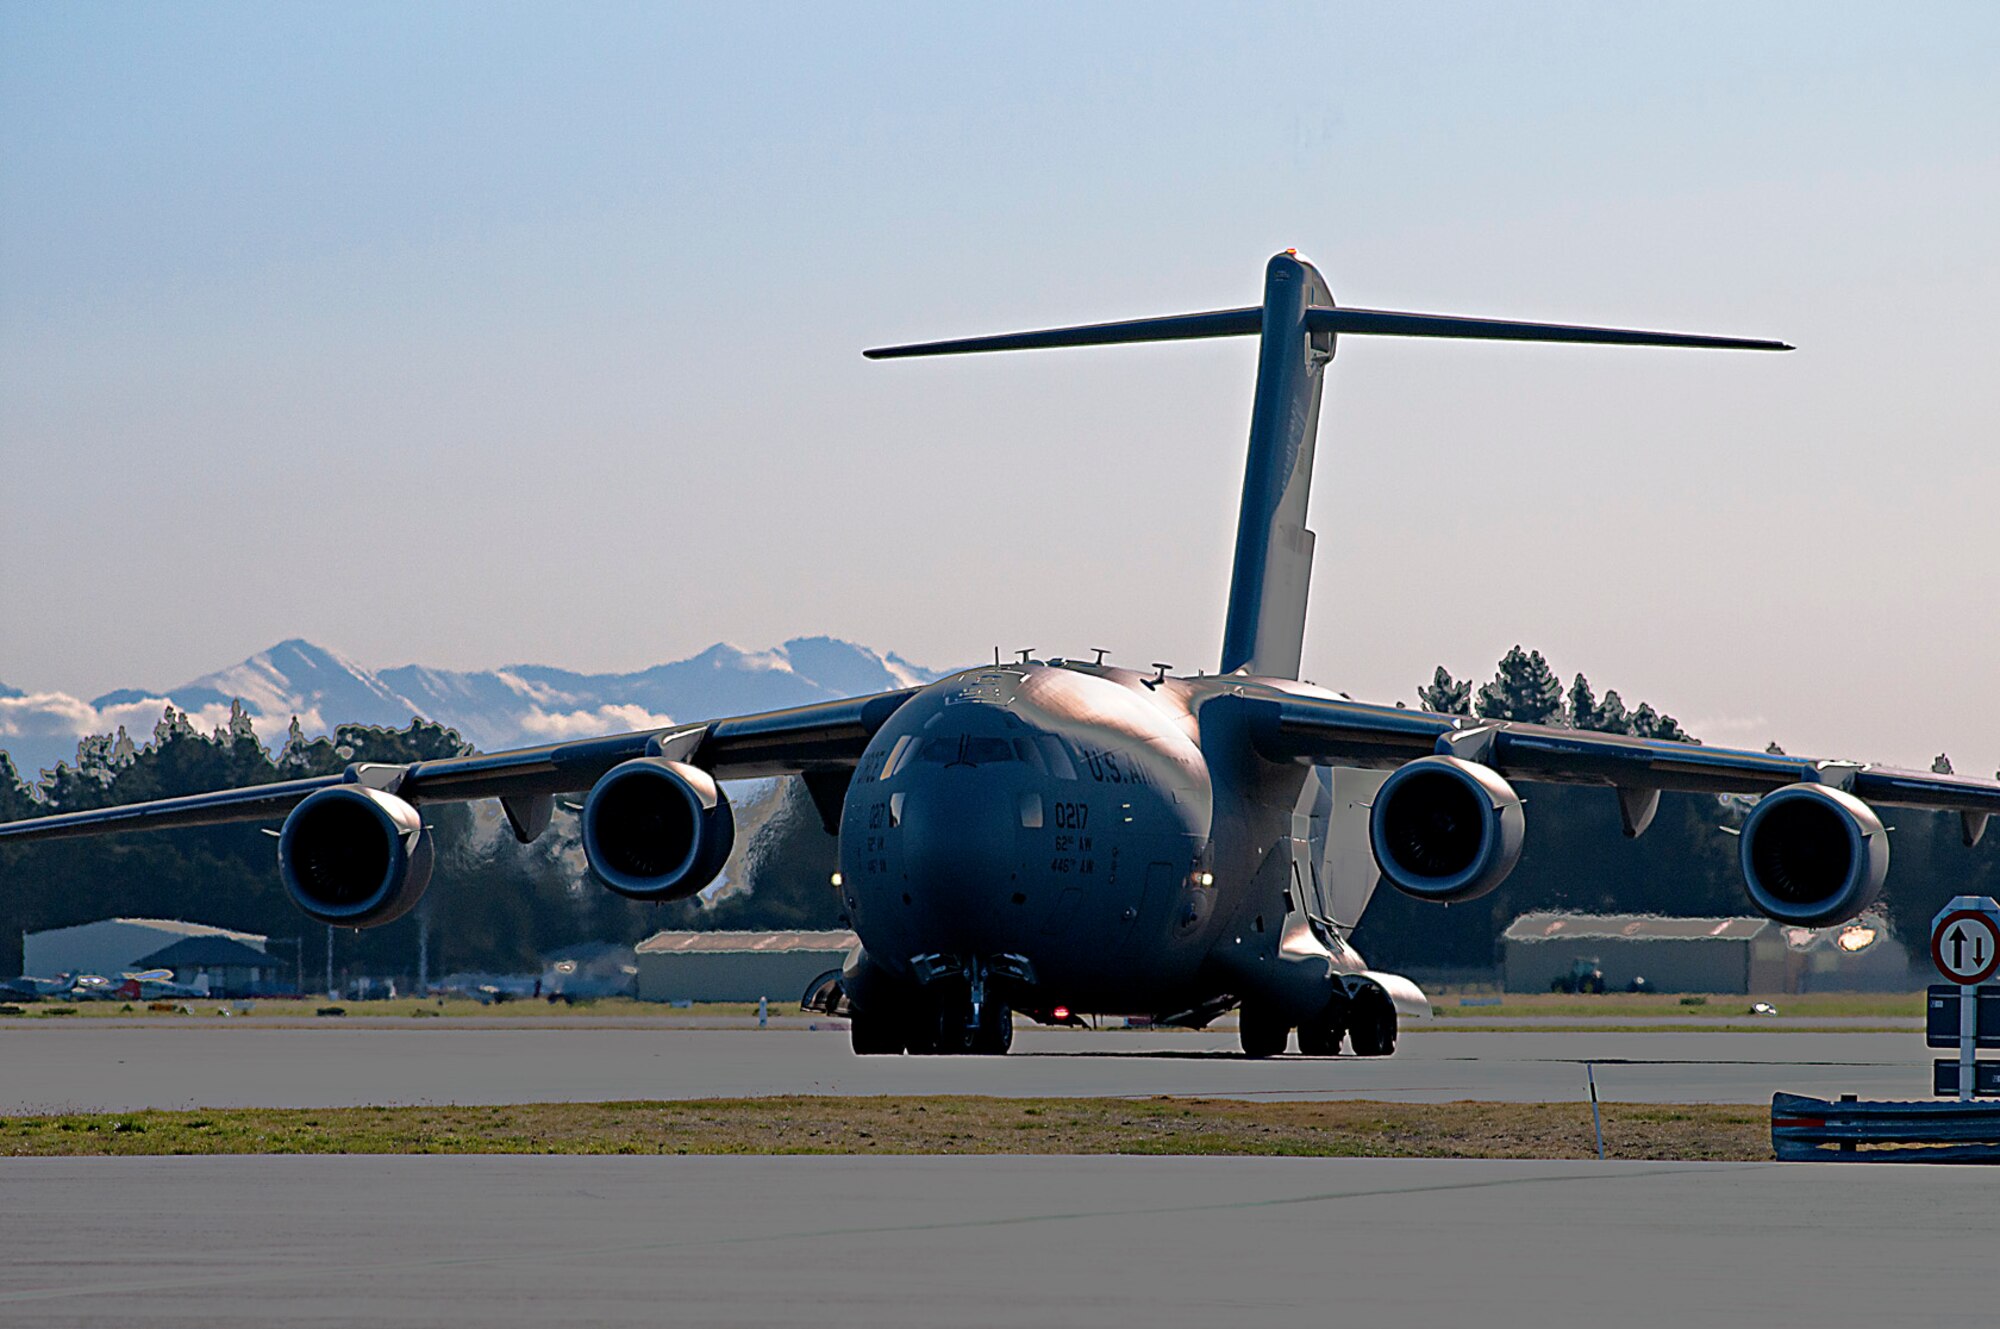 A U.S. Air Force C-17 Globemaster III from Joint Base Lewis-McChord, Washington, taxis to a parking spot at Christchurch International Airport, New Zealand, Aug. 21, 2015. The aircraft was used to fly missions to Antarctica in support of the U.S. Antarctic Program’s WINFLY. WINFLY missions are flown using night vision goggles, because the sun doesn’t rise during winter in Antarctica. (U.S. Air Force photo by Senior Airman Madelyn McCullough)